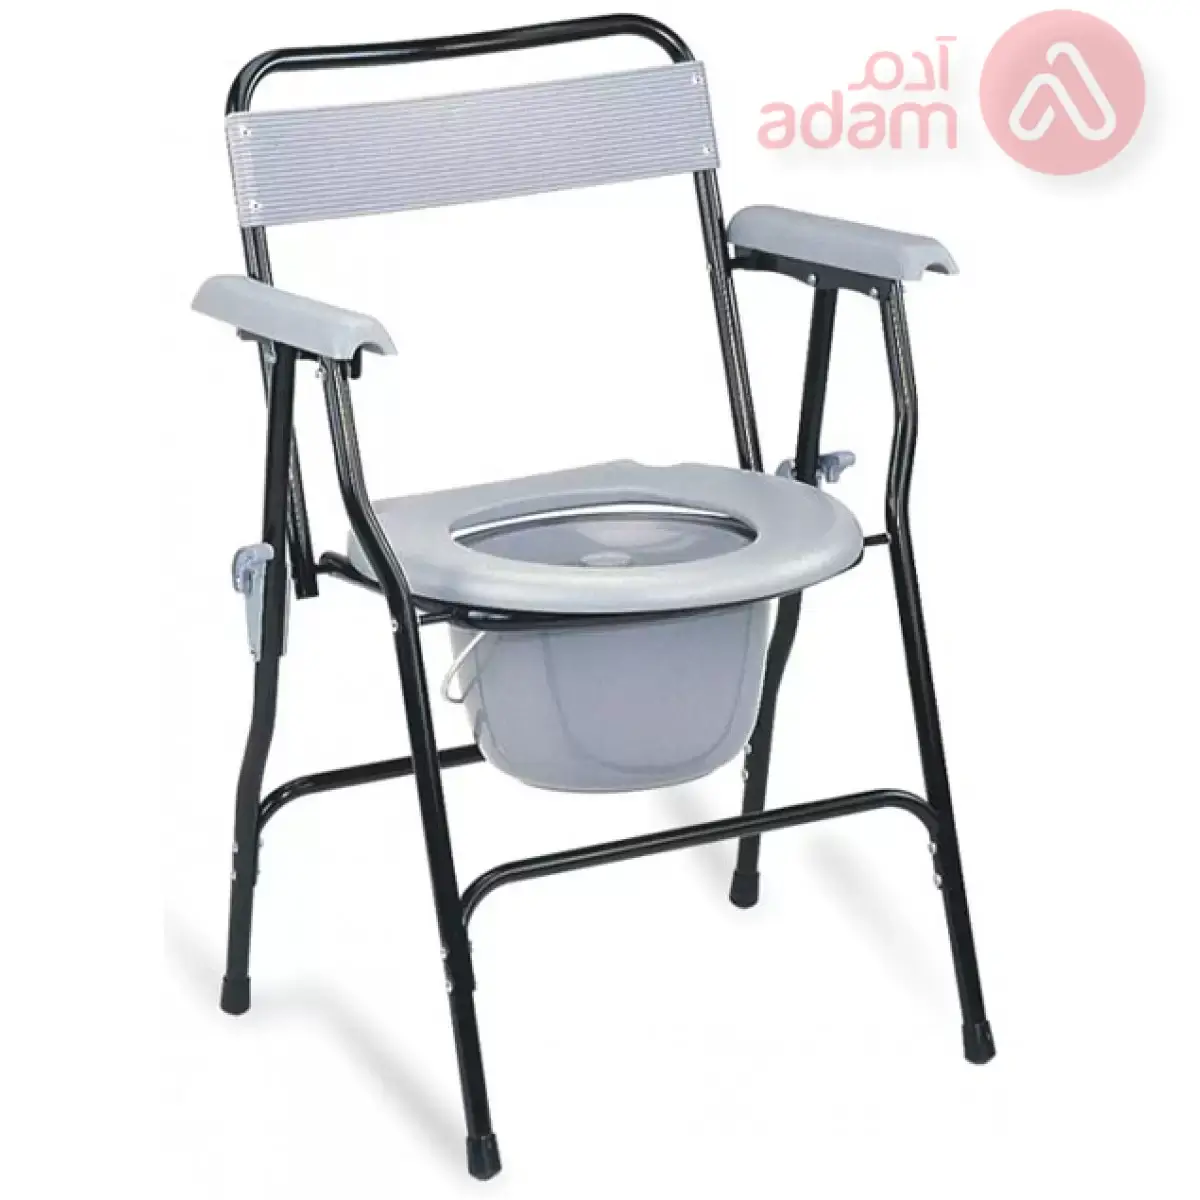 COMMODE CHAIR FS899 WITH BACK CUSHION | GREY